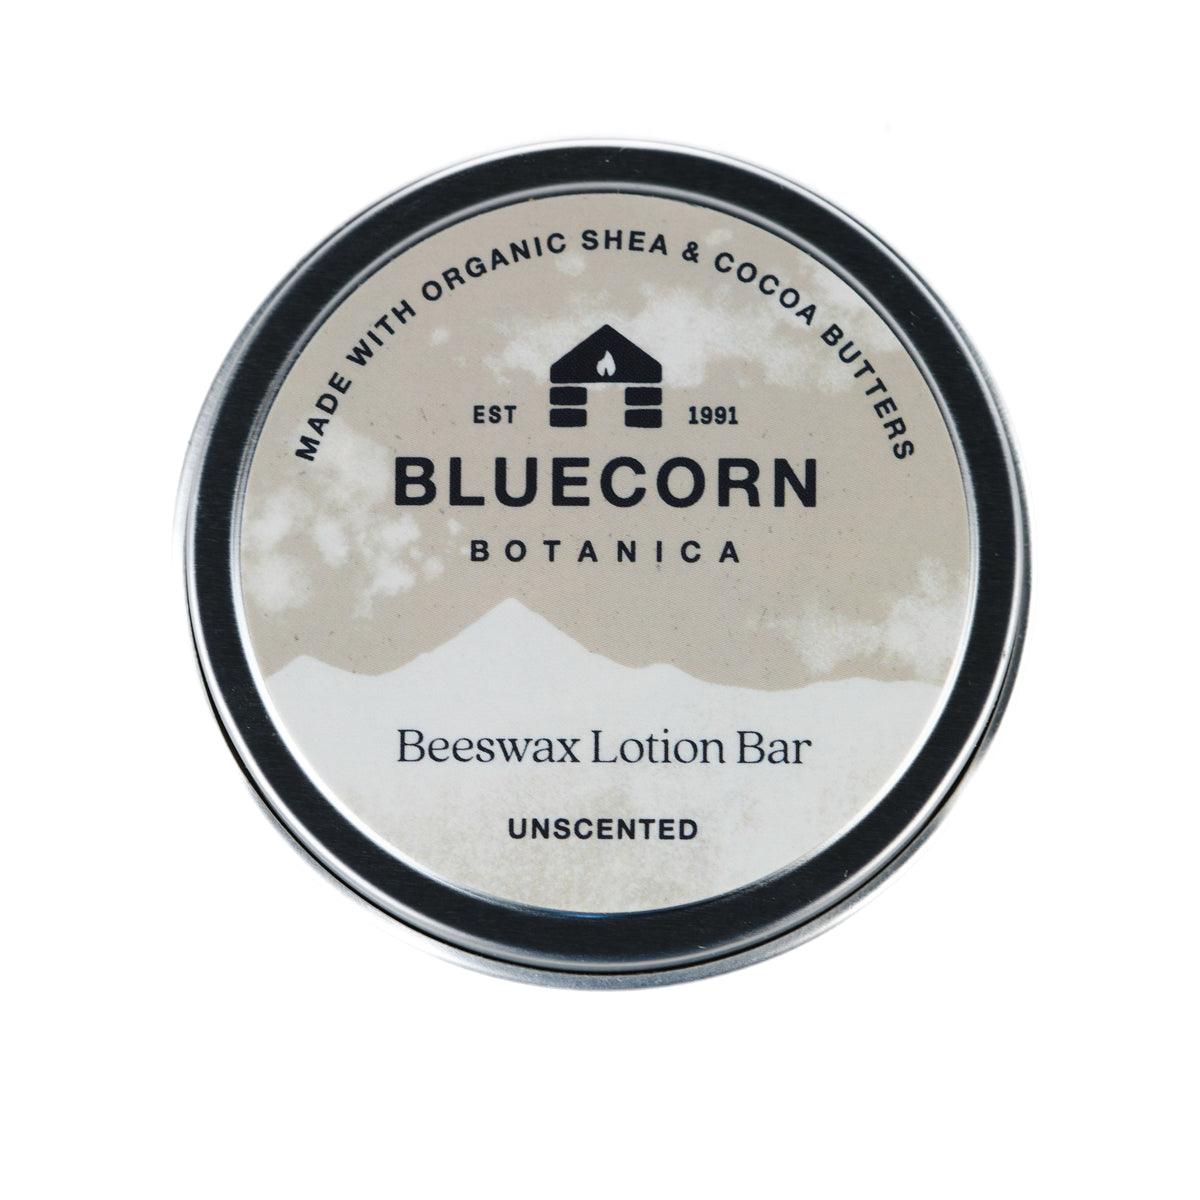 Bluecorn Botanica Beeswax Lotion Bar in Unscented. Made with Organic Shea Butter, Organic Cocoa Butter, Avocado Oil, Apricot Oil, Cappings Beeswax, Essential Oils. Using the warmth of your hands, these solids bars will turn into lotions. Can be used all over the body and come in a convenient tin. Features grey Bluecorn Botanica Label on aluminum tin with opened lid showing lotion bar. Lotion bar is cream in color and features Bluecorn cabin.